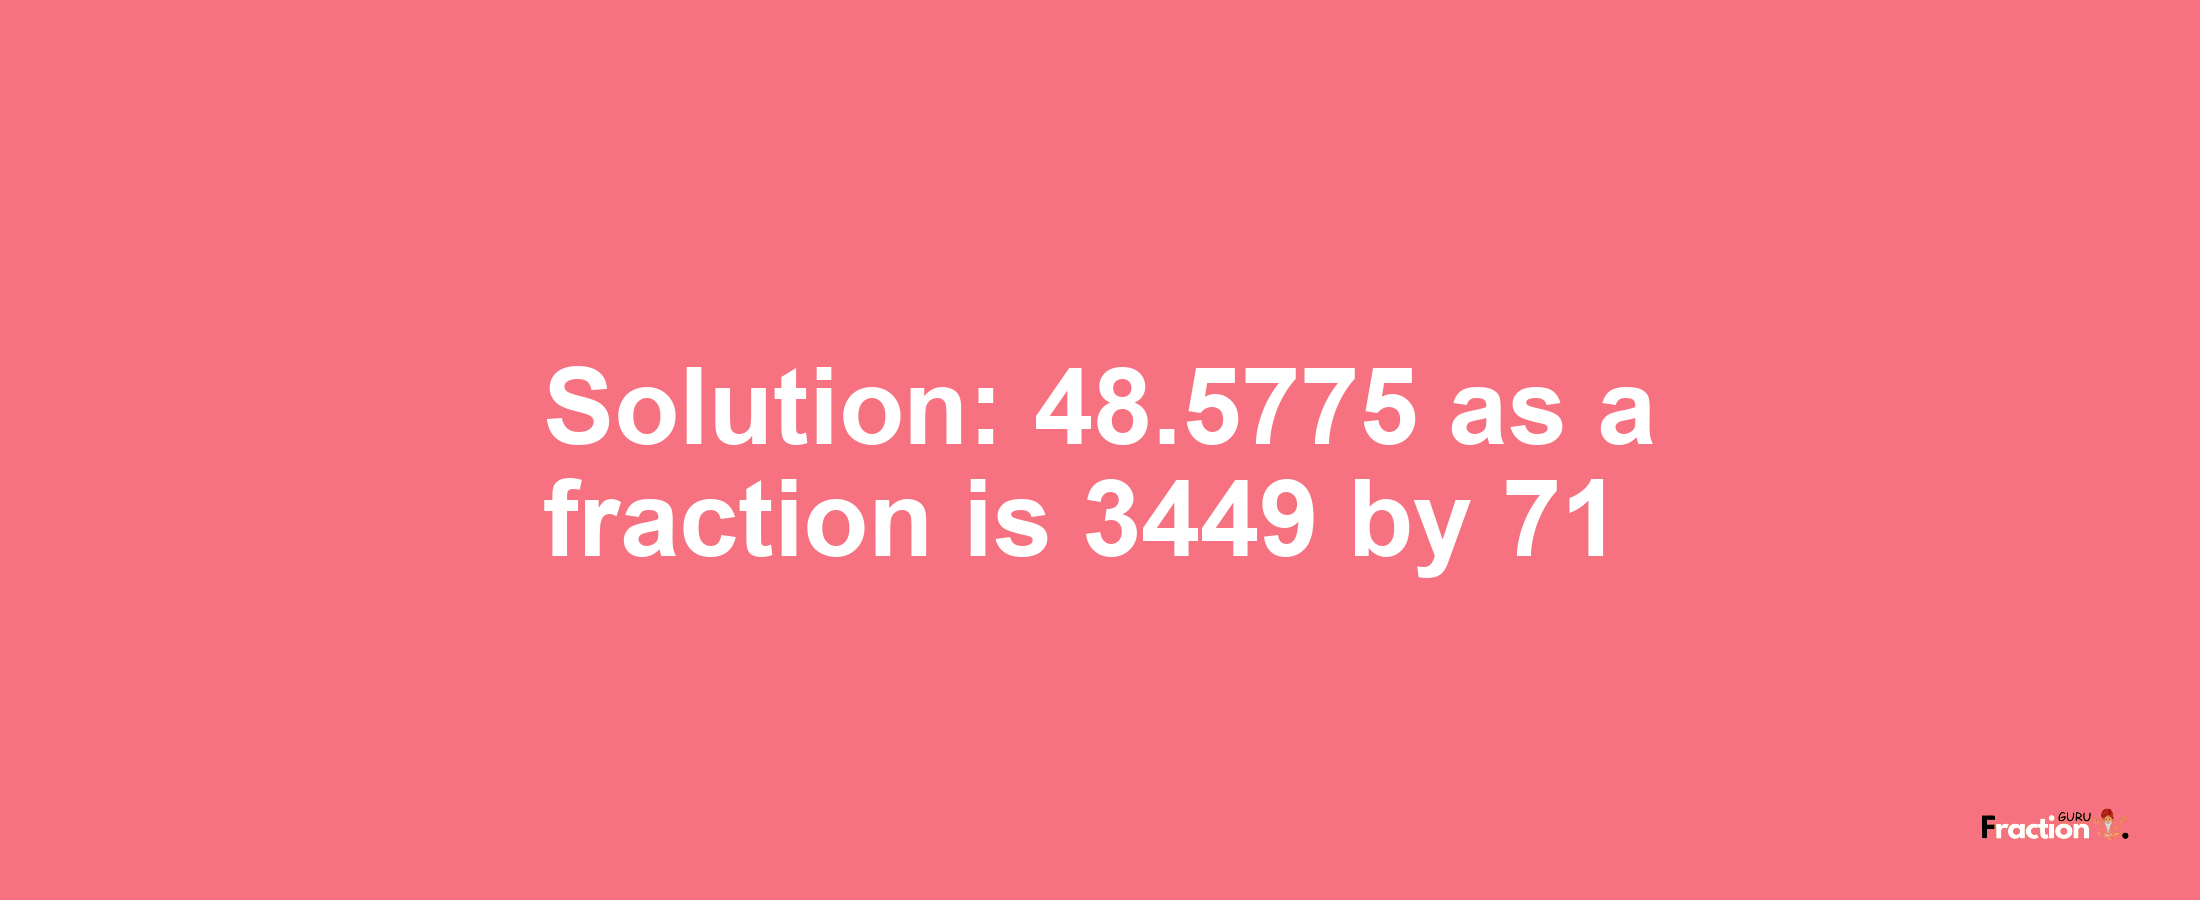 Solution:48.5775 as a fraction is 3449/71